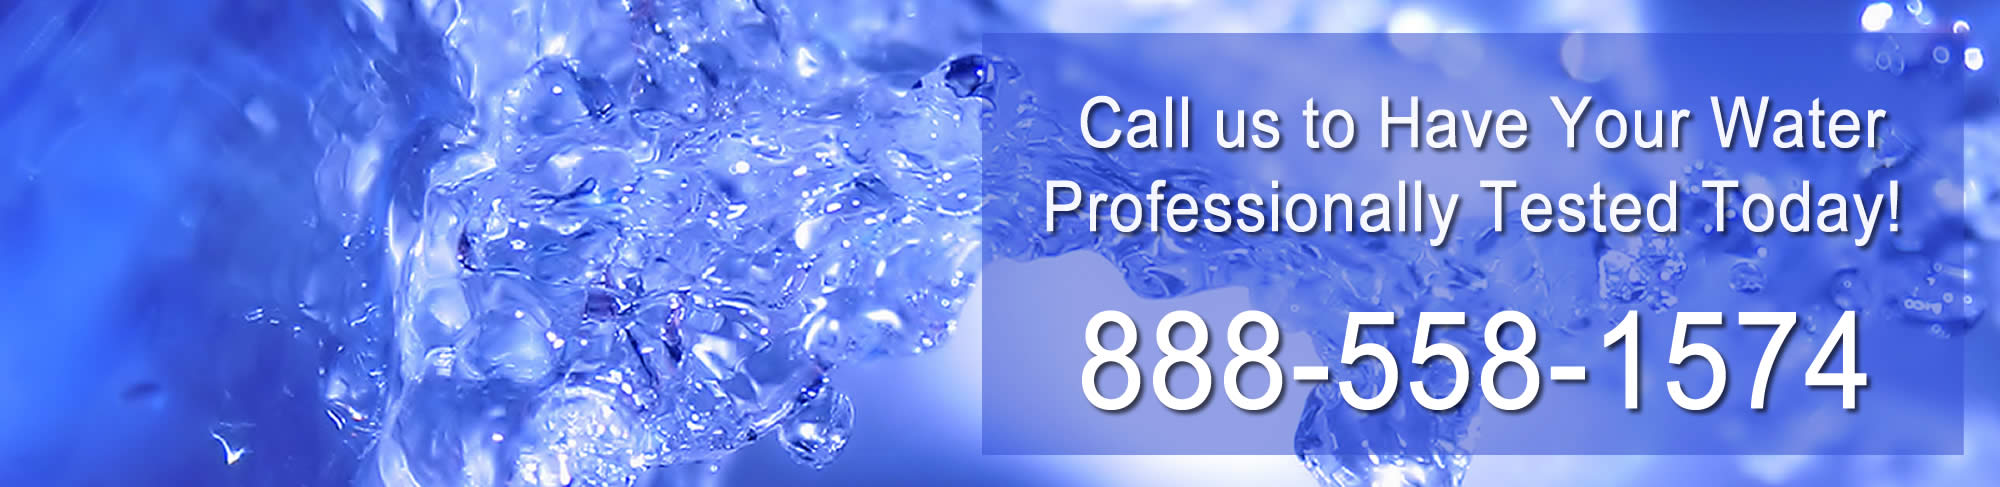 Specializing in Bethlehem CT Water Testing and Analysis